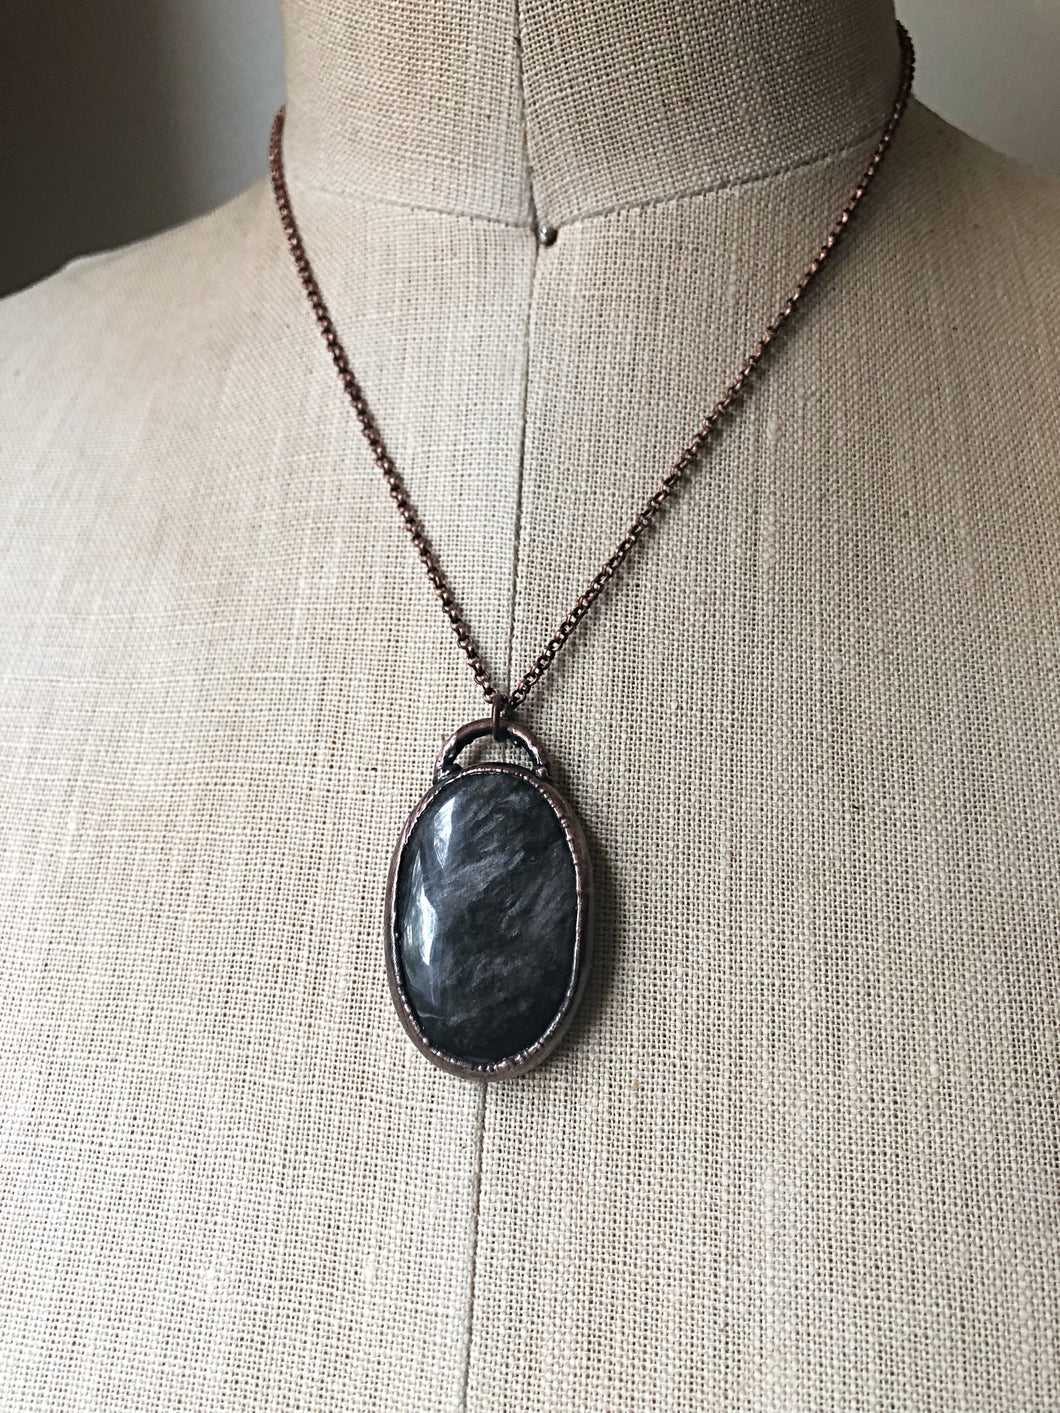 Silver Obsidian Oval Necklace #1 (Ready to Ship) - Darkness Calling Collection